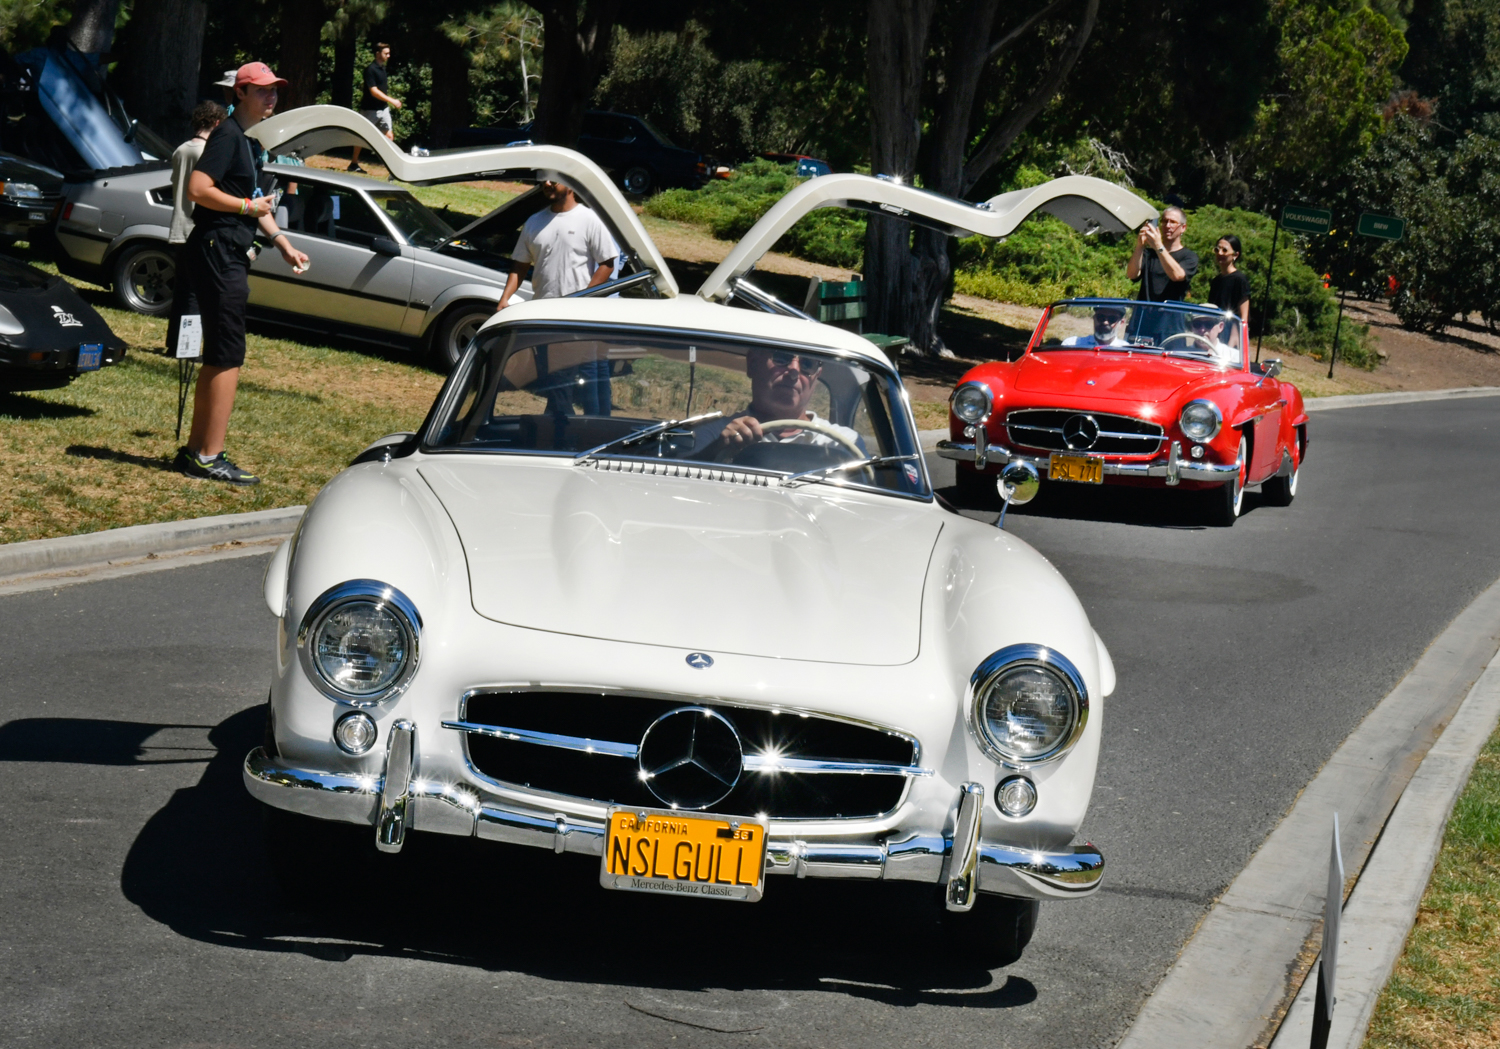 57 Gullwing leads the procession